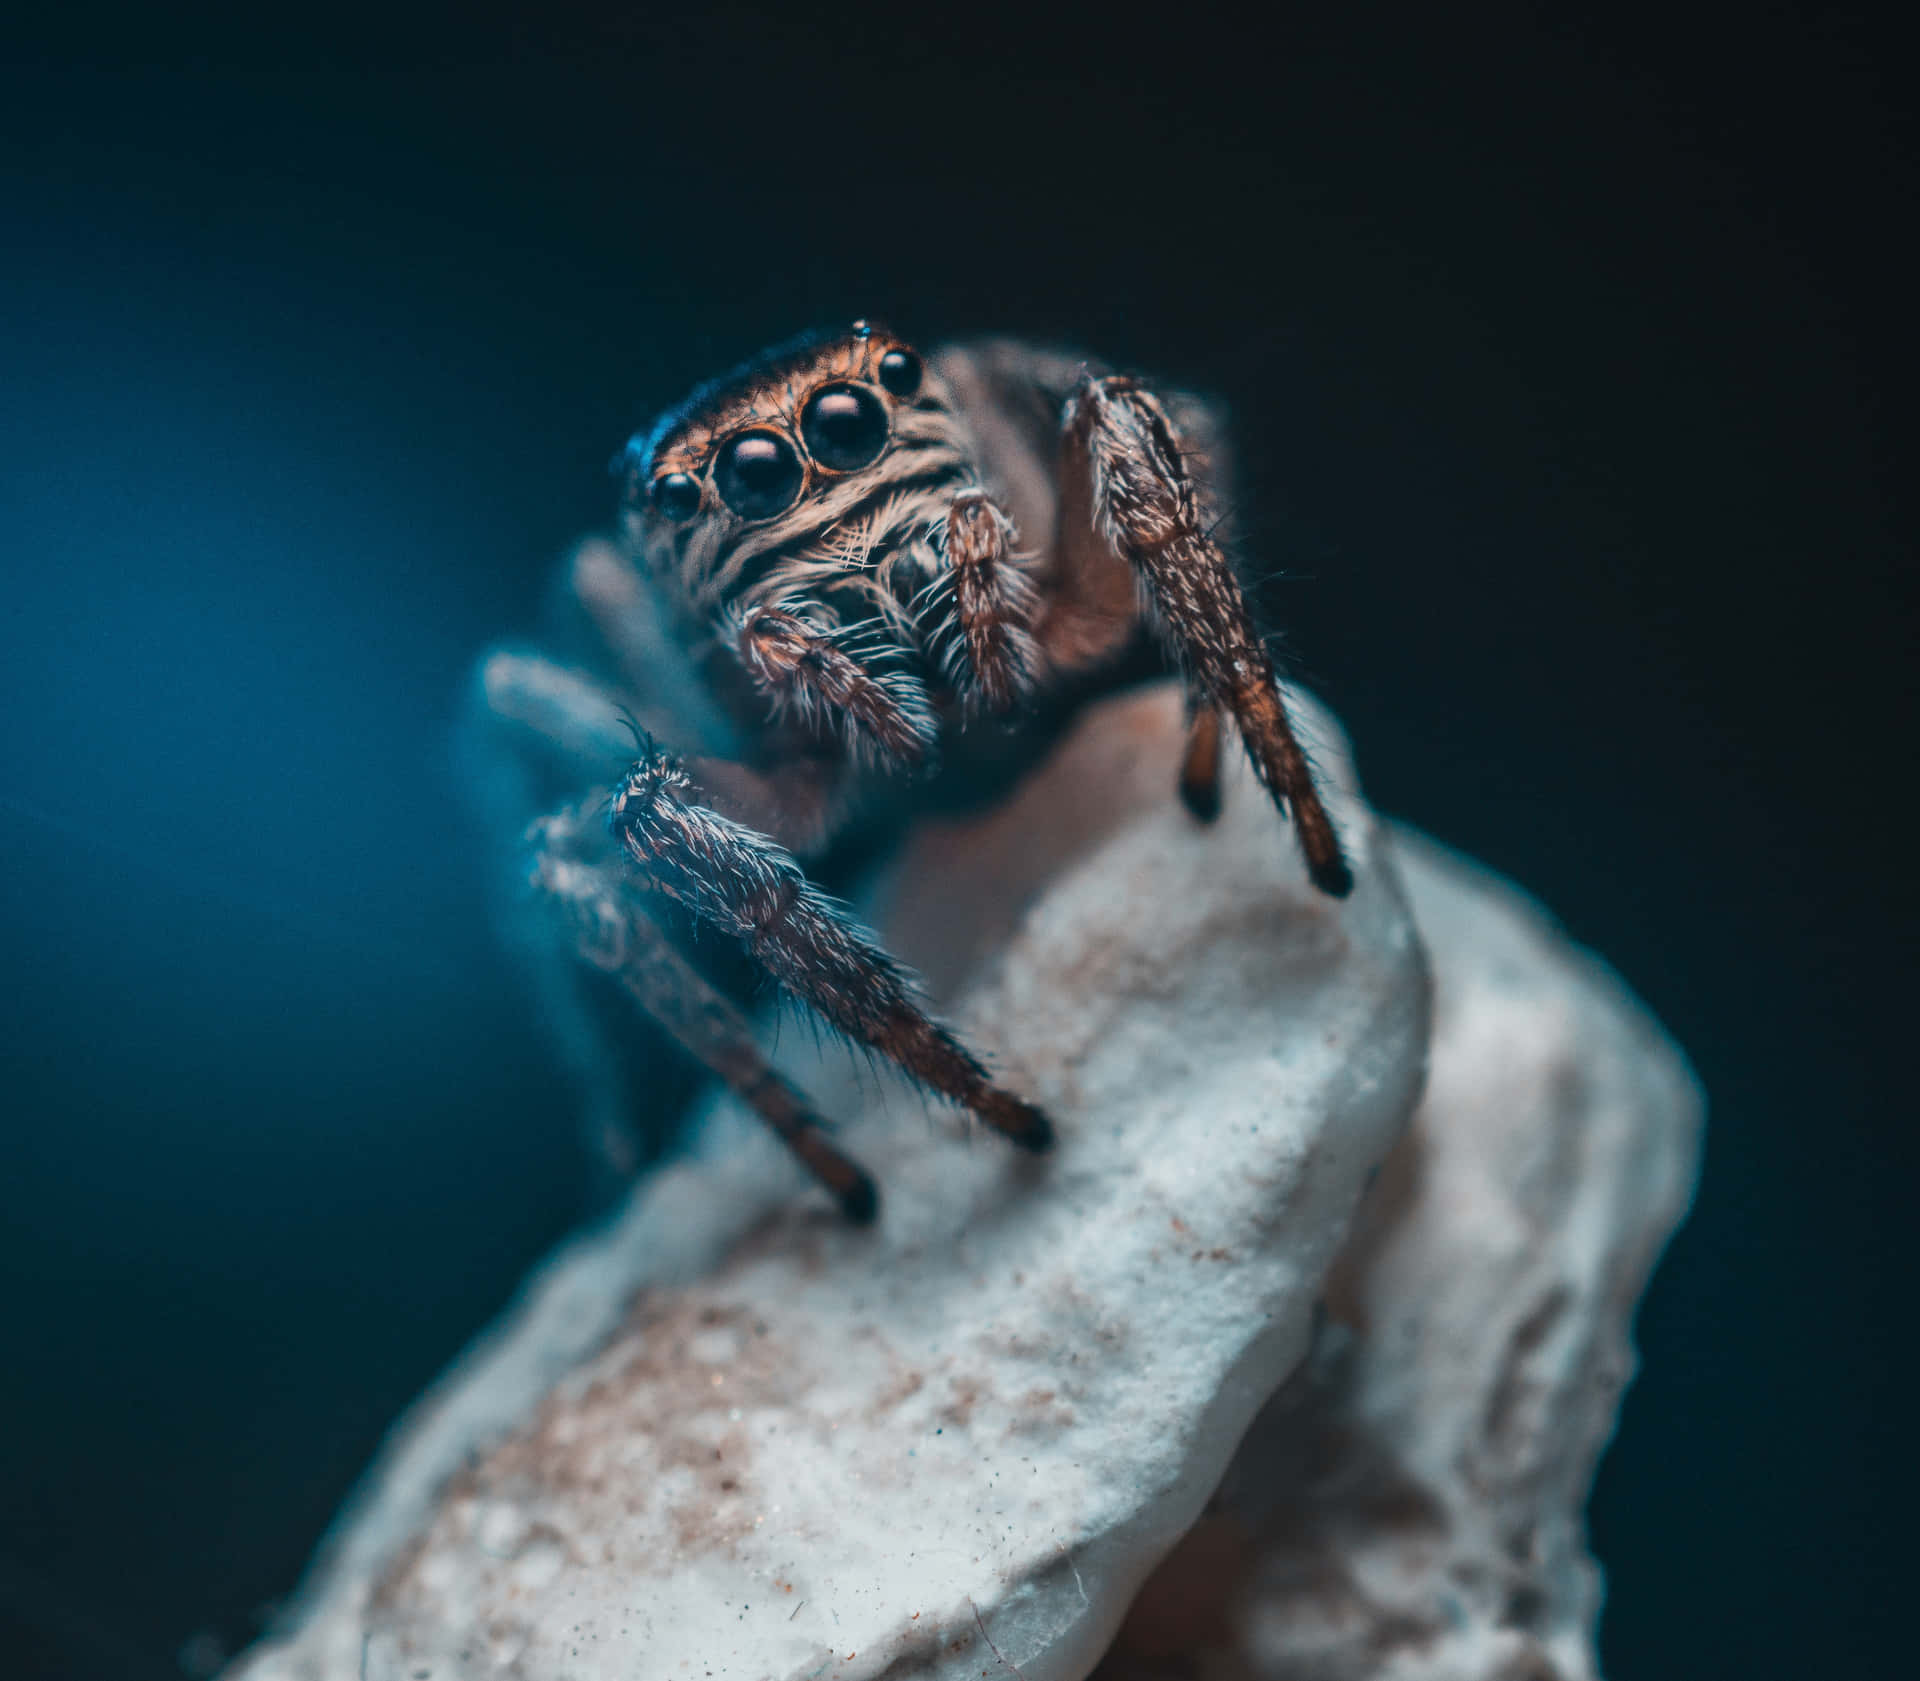 Mysterious Night Spider